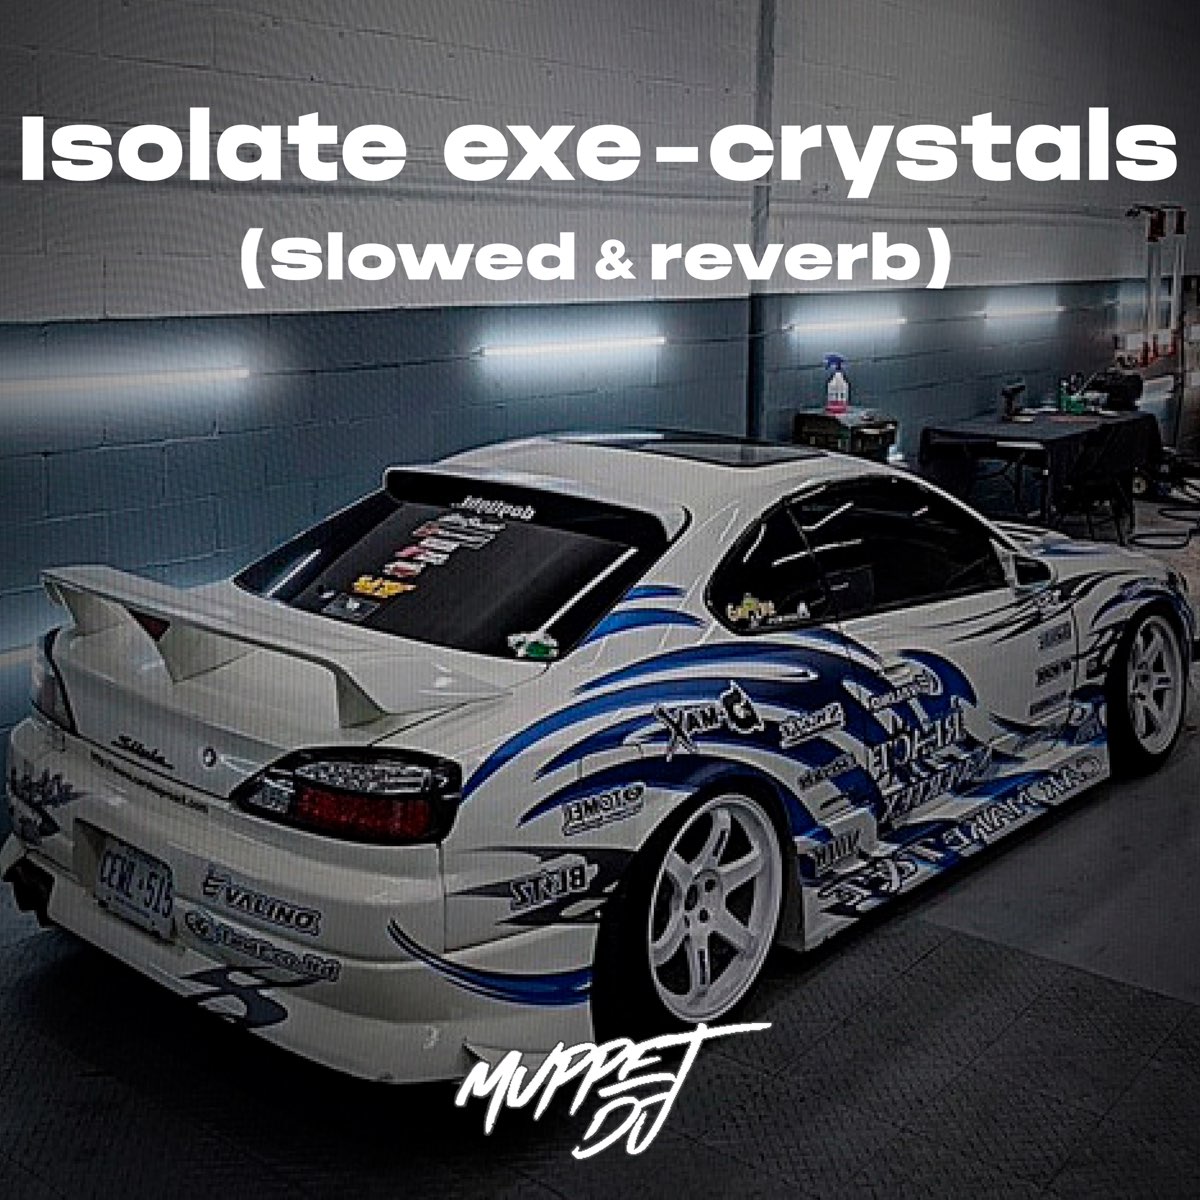 Isolate exe crystals speed up. Crystals isolate.exe. Isolate exe. Isolate.exe - Crystals (Slowed € Reverb). Crystal exe.